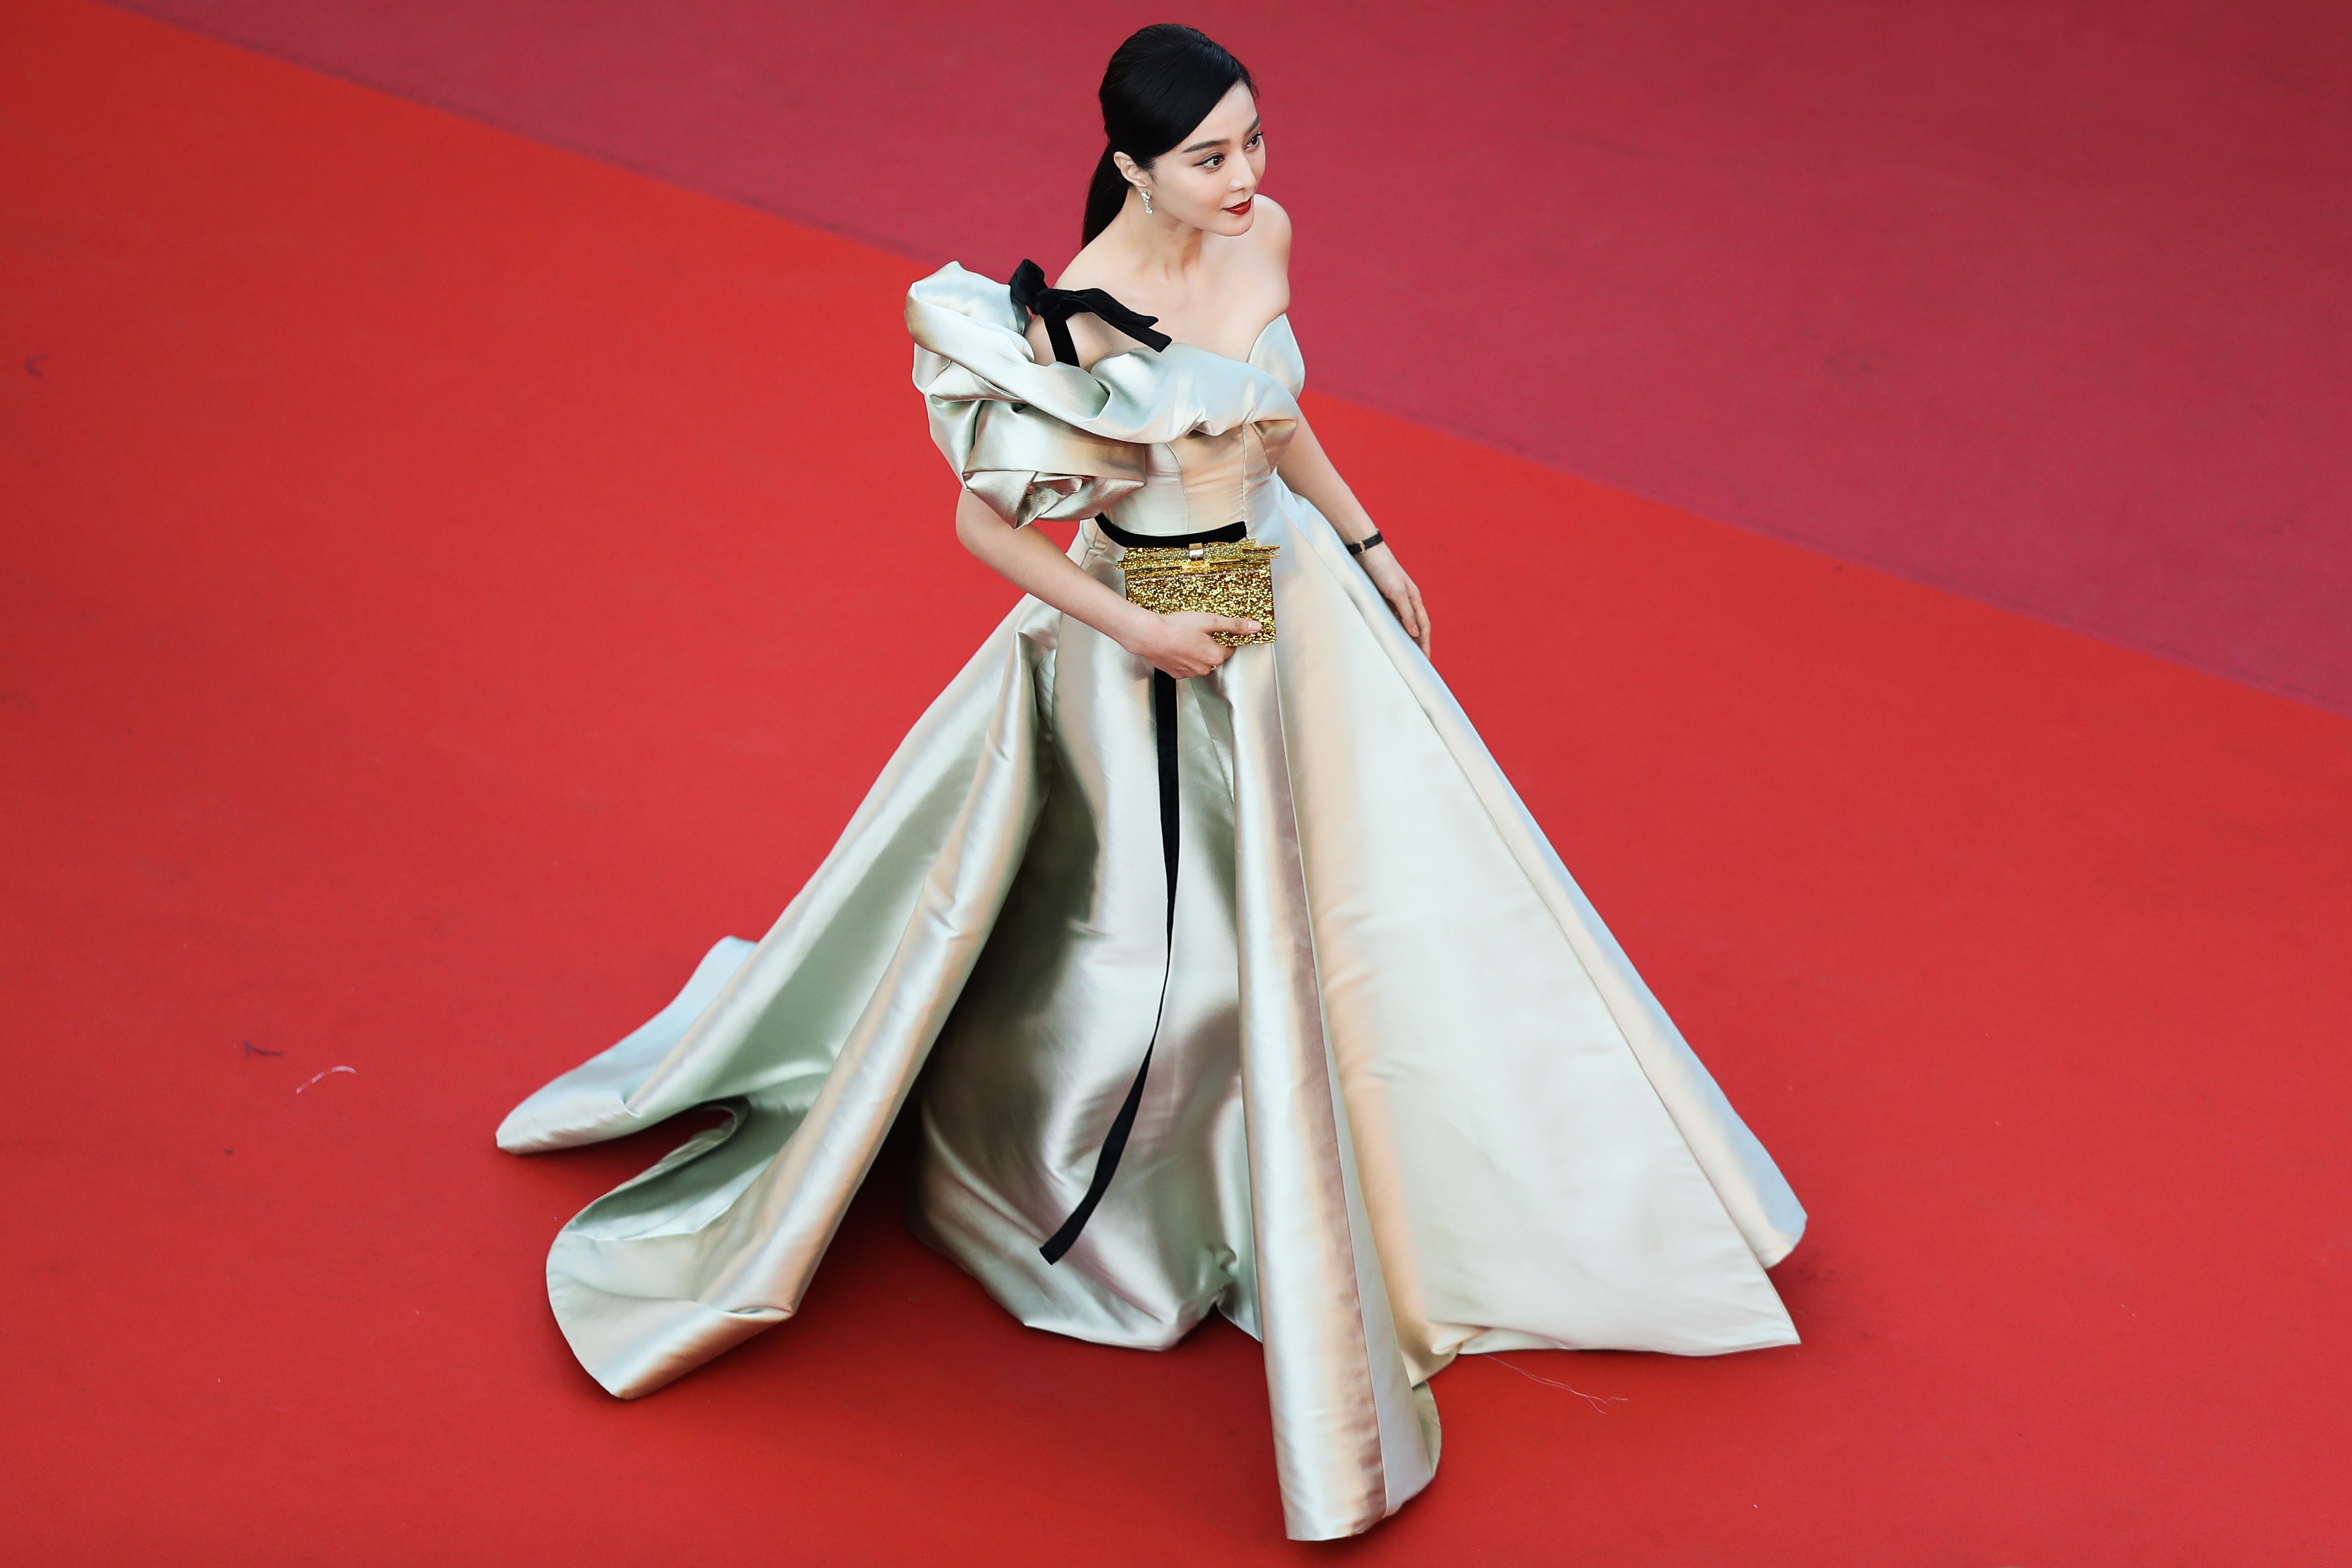 China Entertainment News: Zhou Dongyu at promo event in Cannes